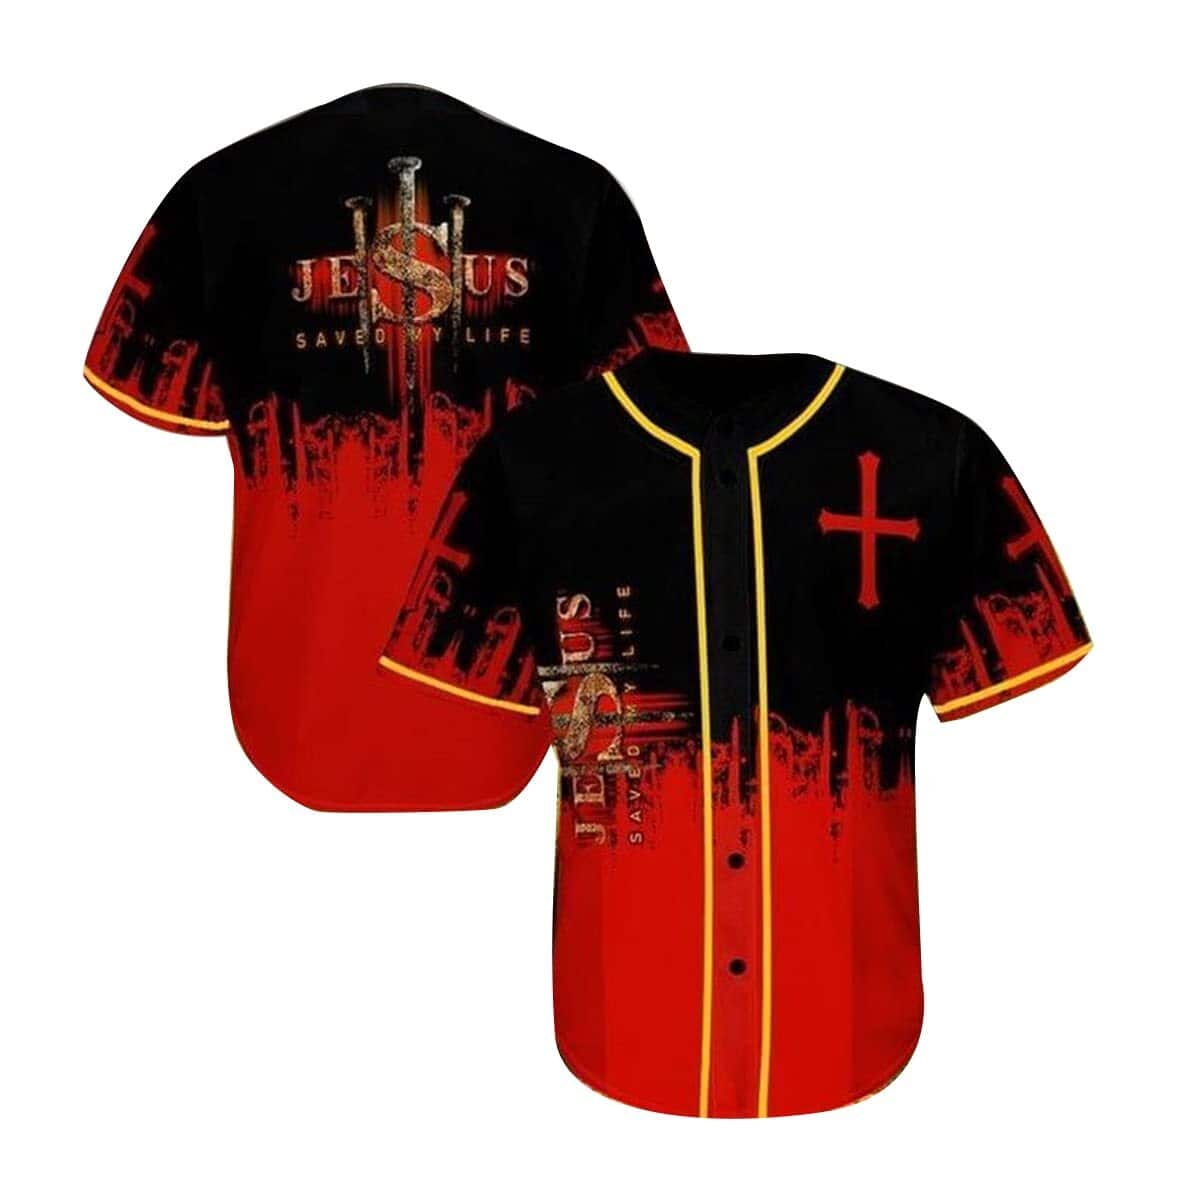 Jesus Saved My Life On The Fire Pattern Religious Gift For Christians Baseball Jersey